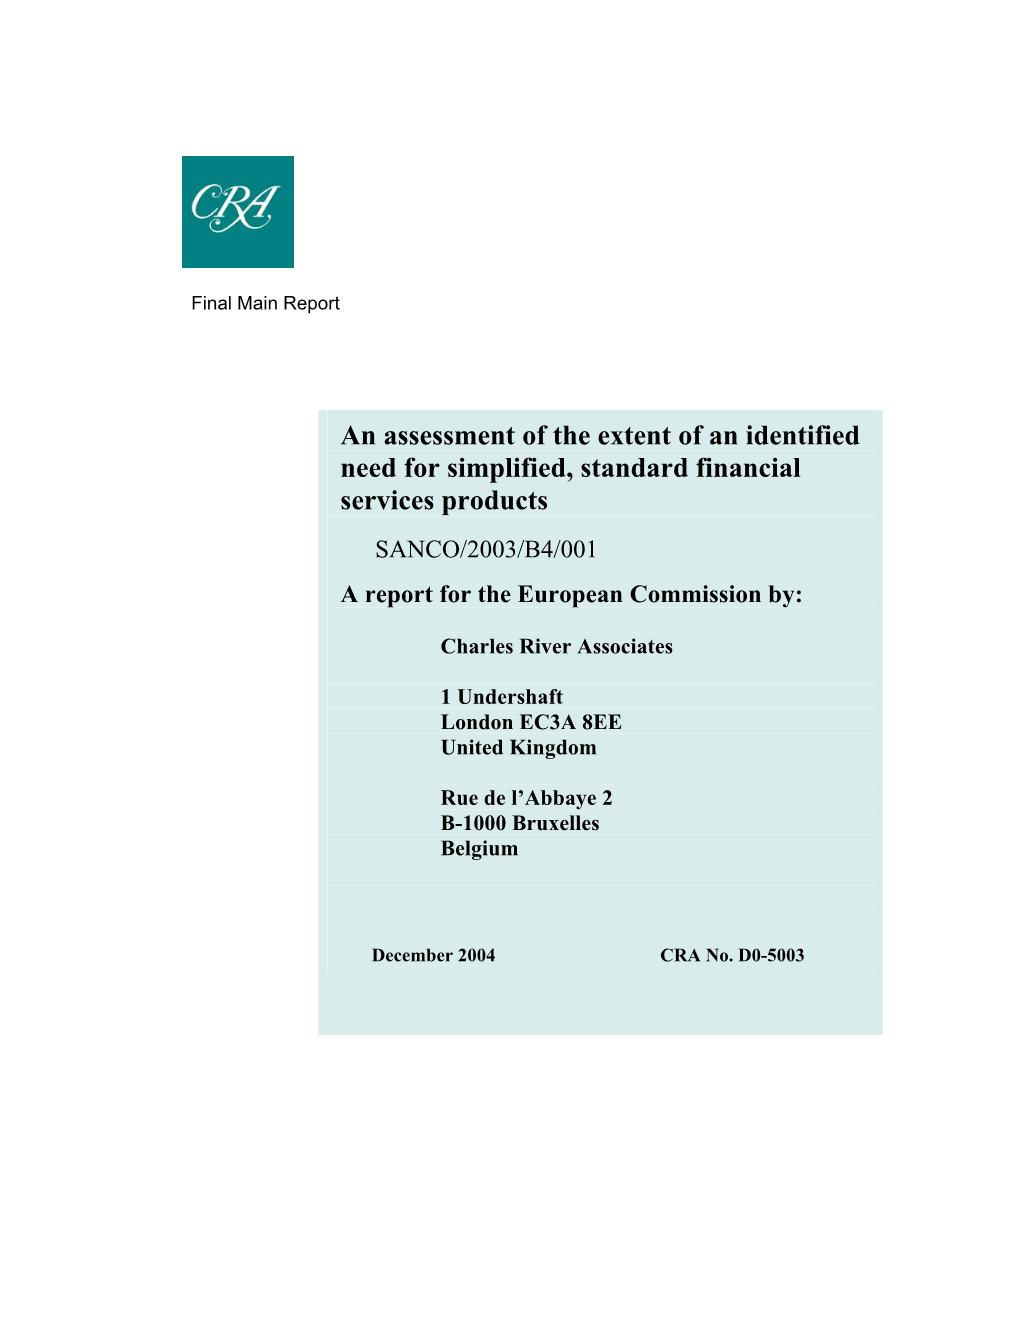 An Assessment of the Extent of an Identified Need for Simplified, Standard Financial Services Products SANCO/2003/B4/001 a Report for the European Commission By